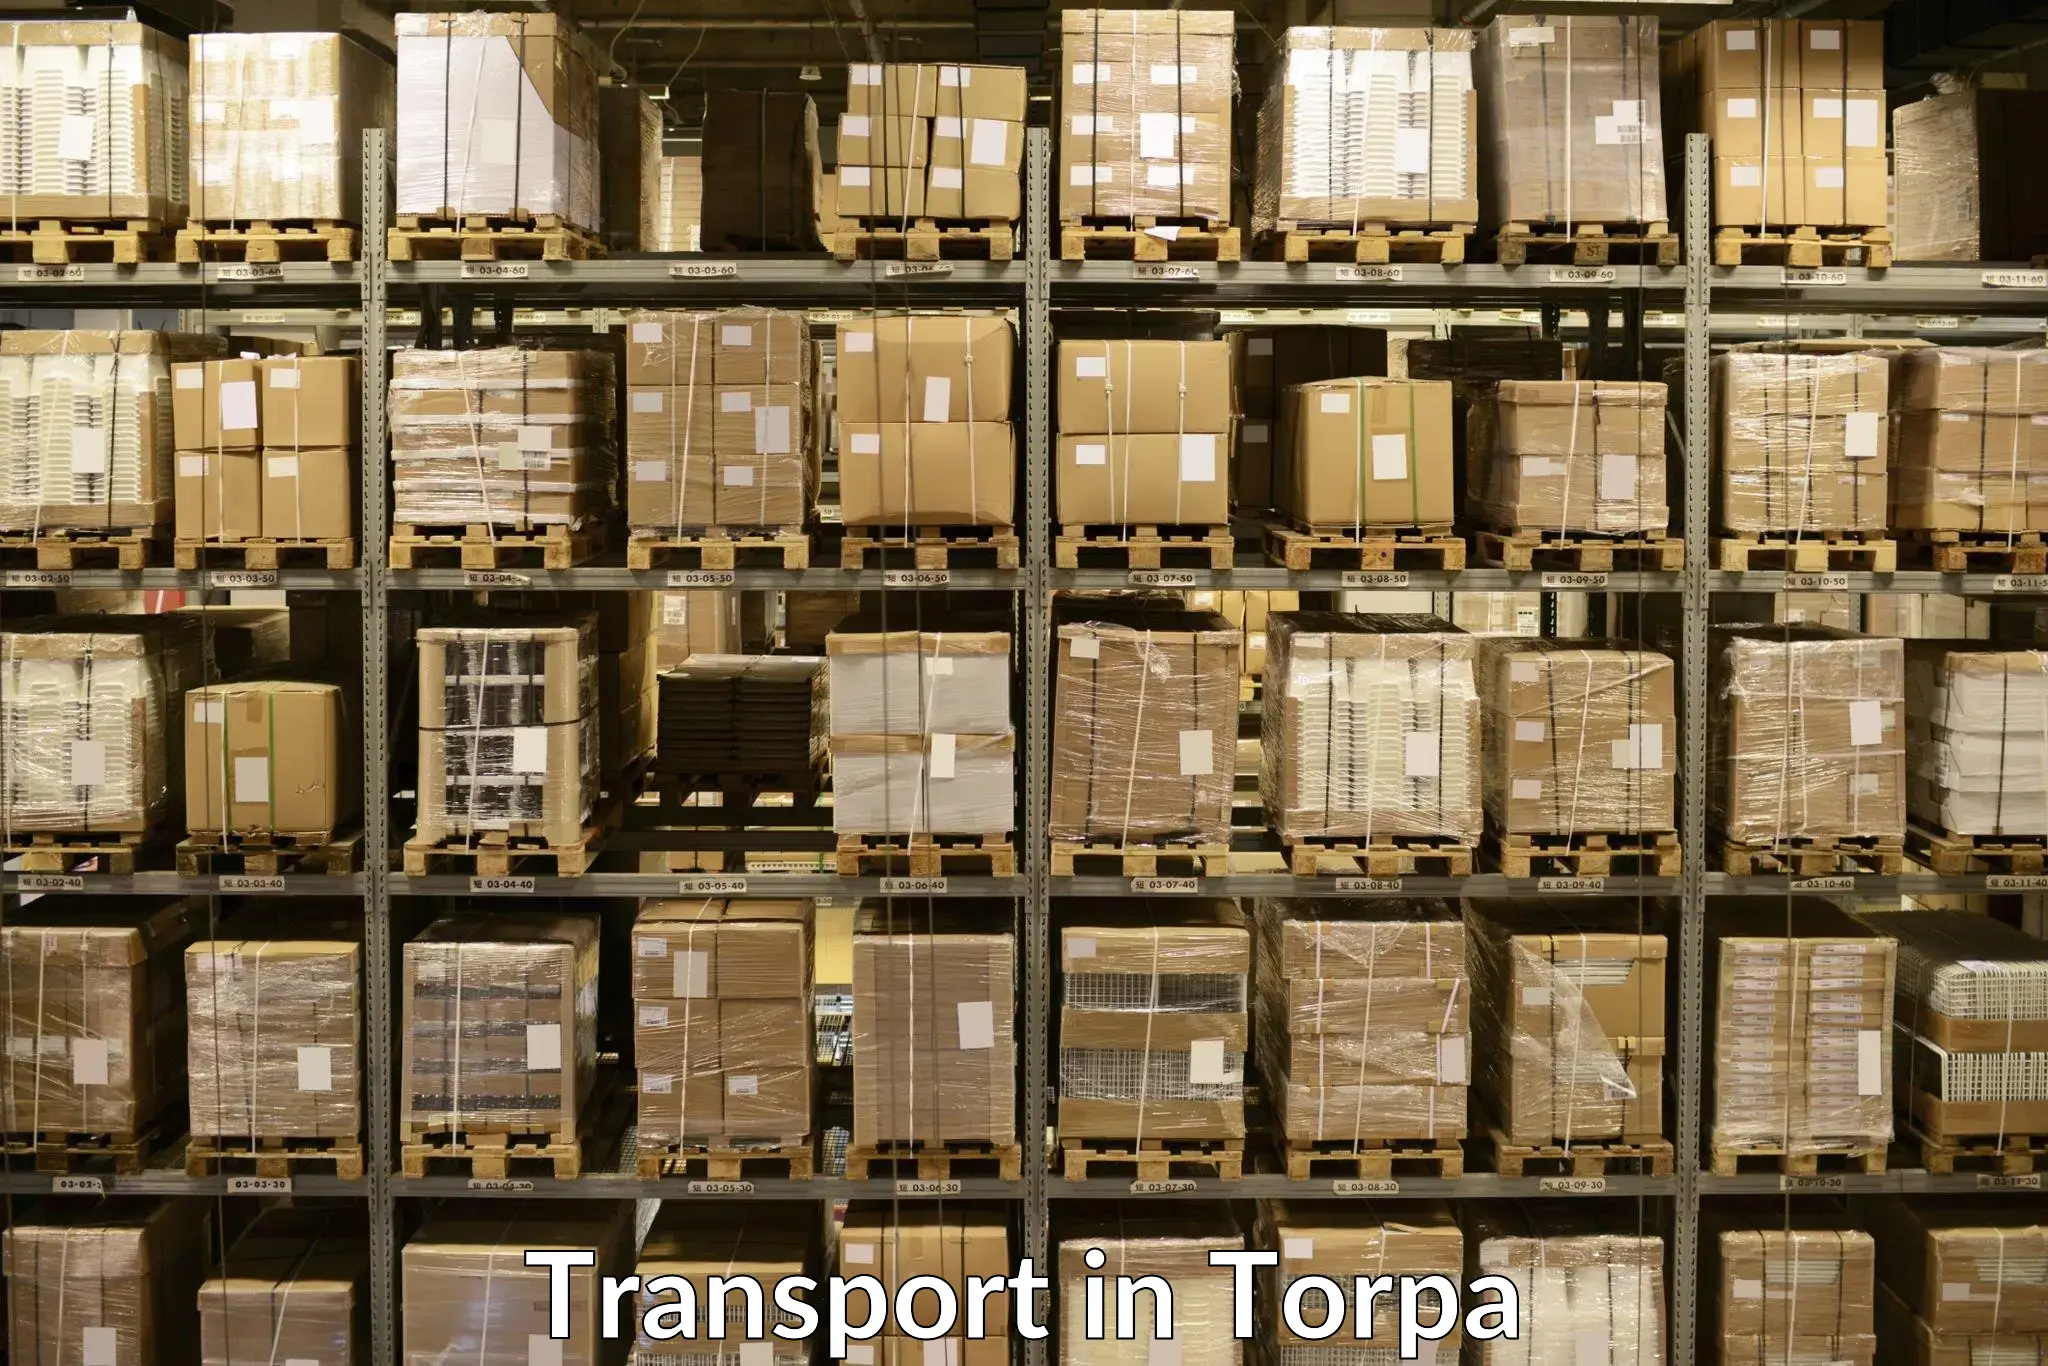 Daily parcel service transport in Torpa